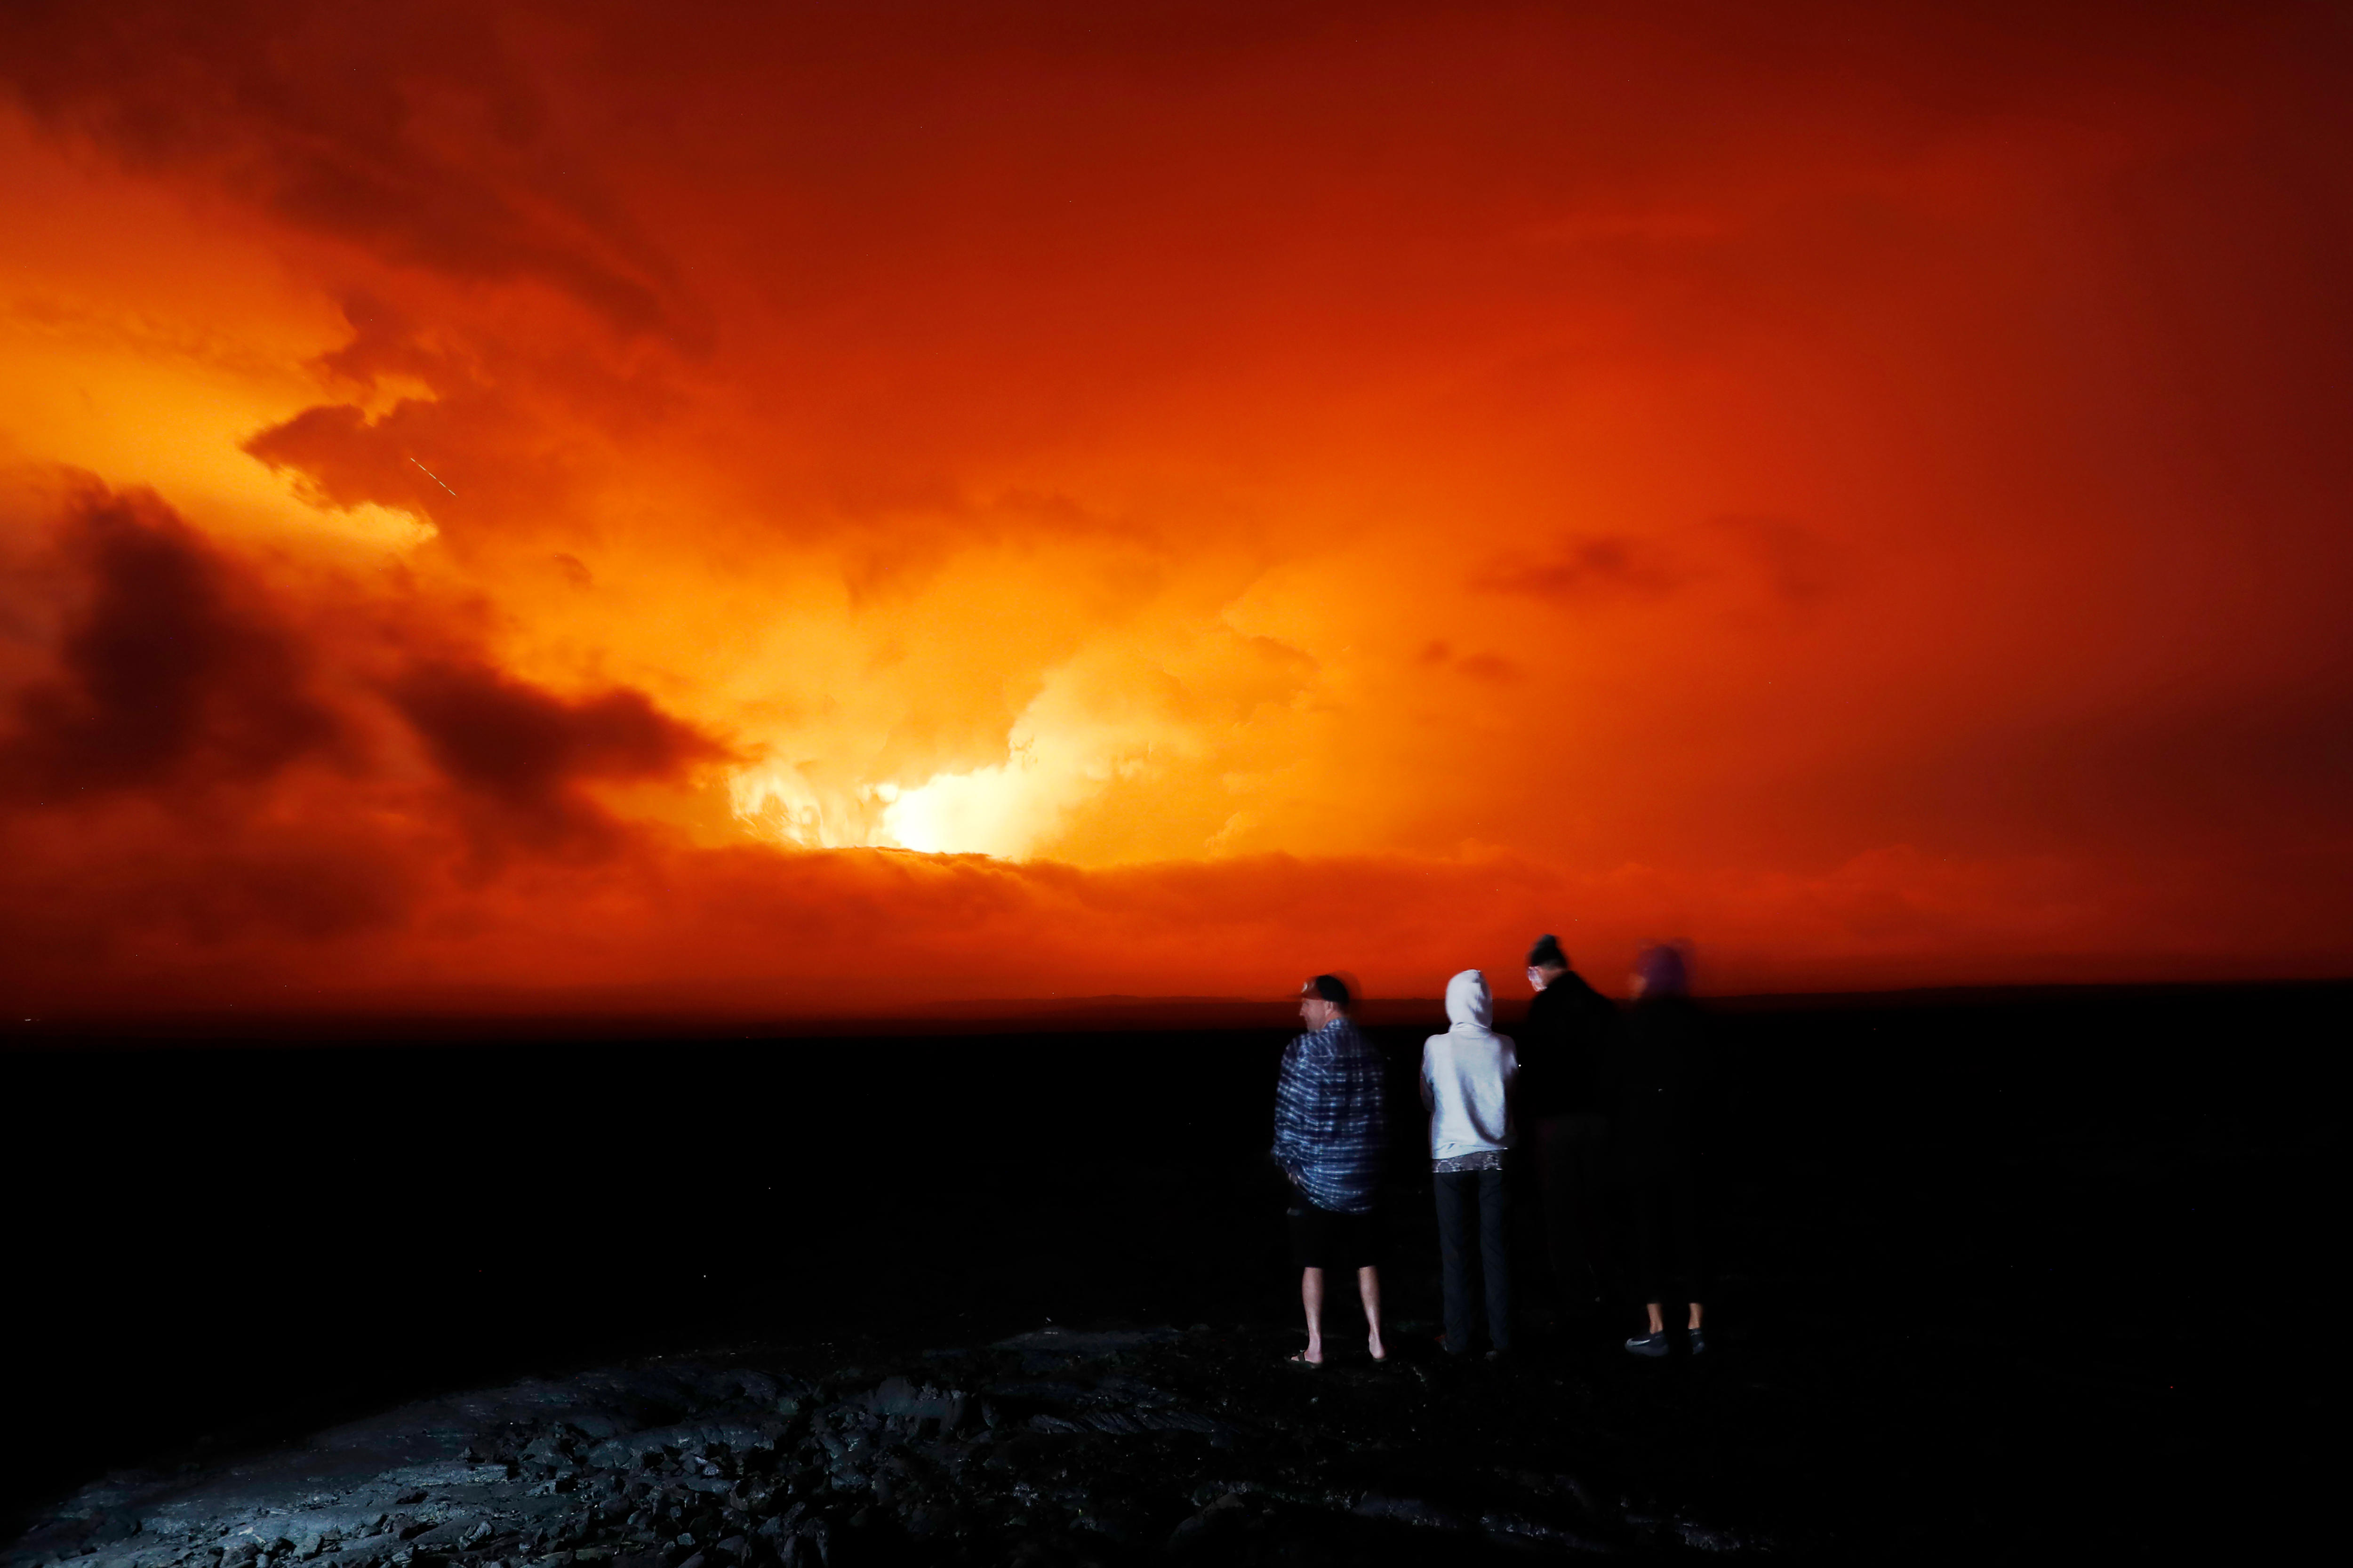 A group of people watch the eruption of a volcano light up the night sky